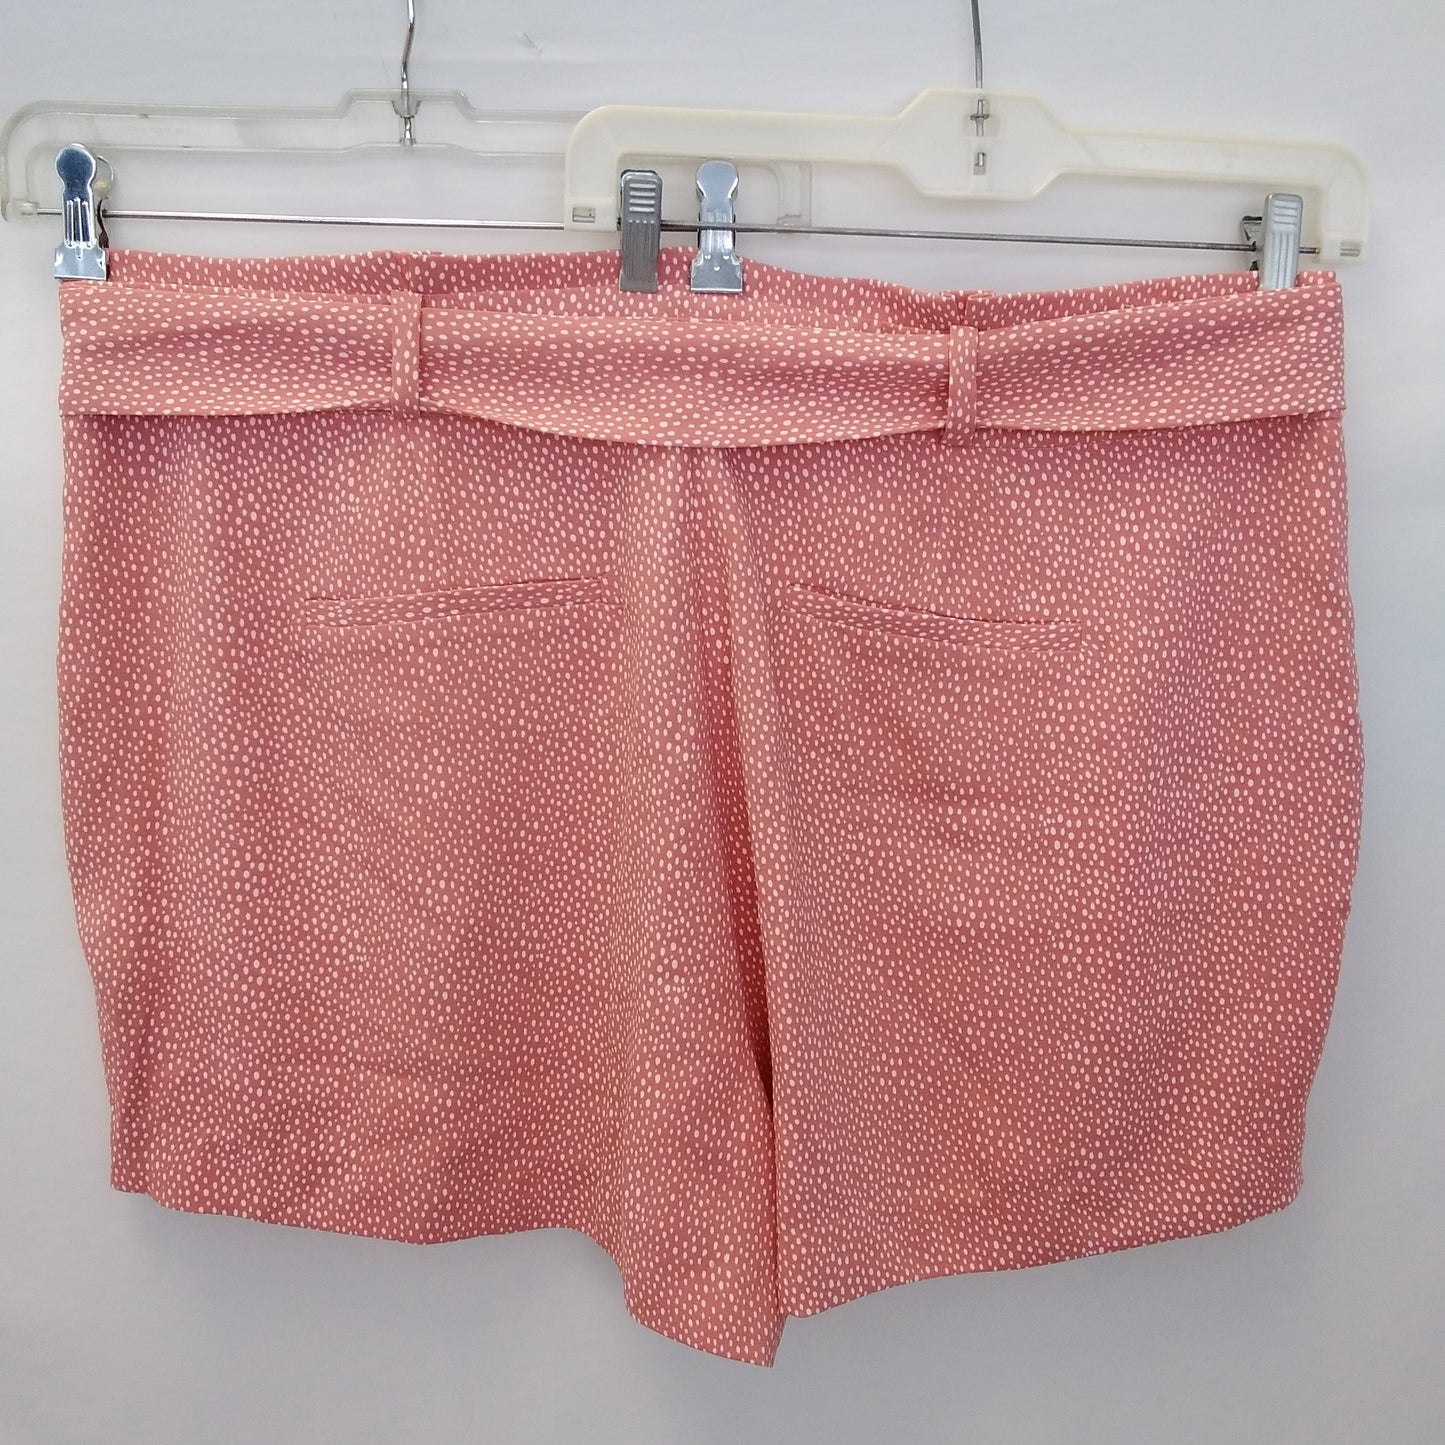 NWT - Torrid Women's Pink Dot Tie Front Shorts - Size: 20